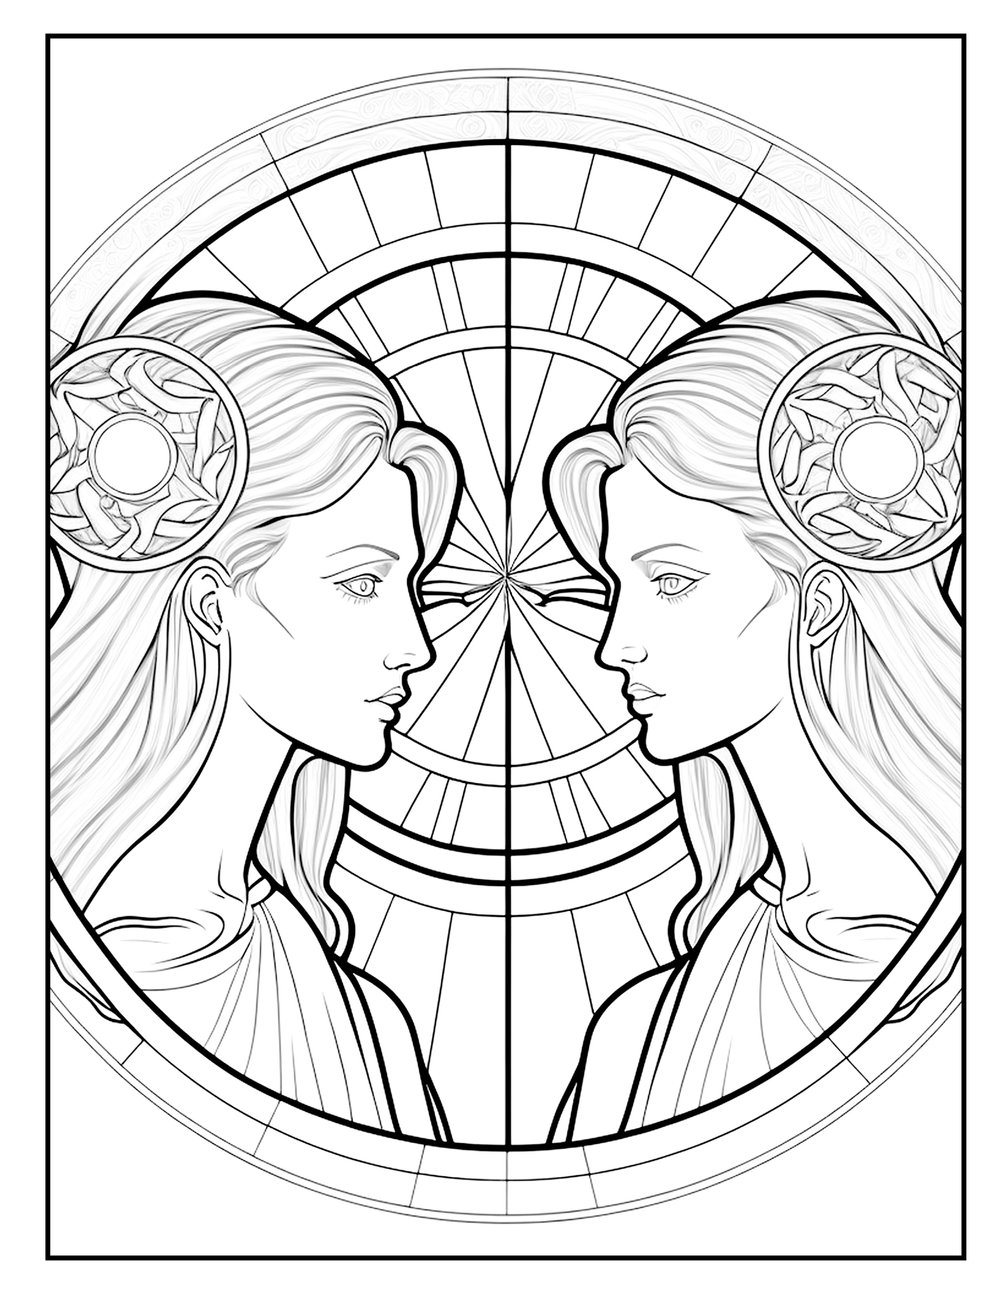 Stained glass style coloring pages images â chris nelson